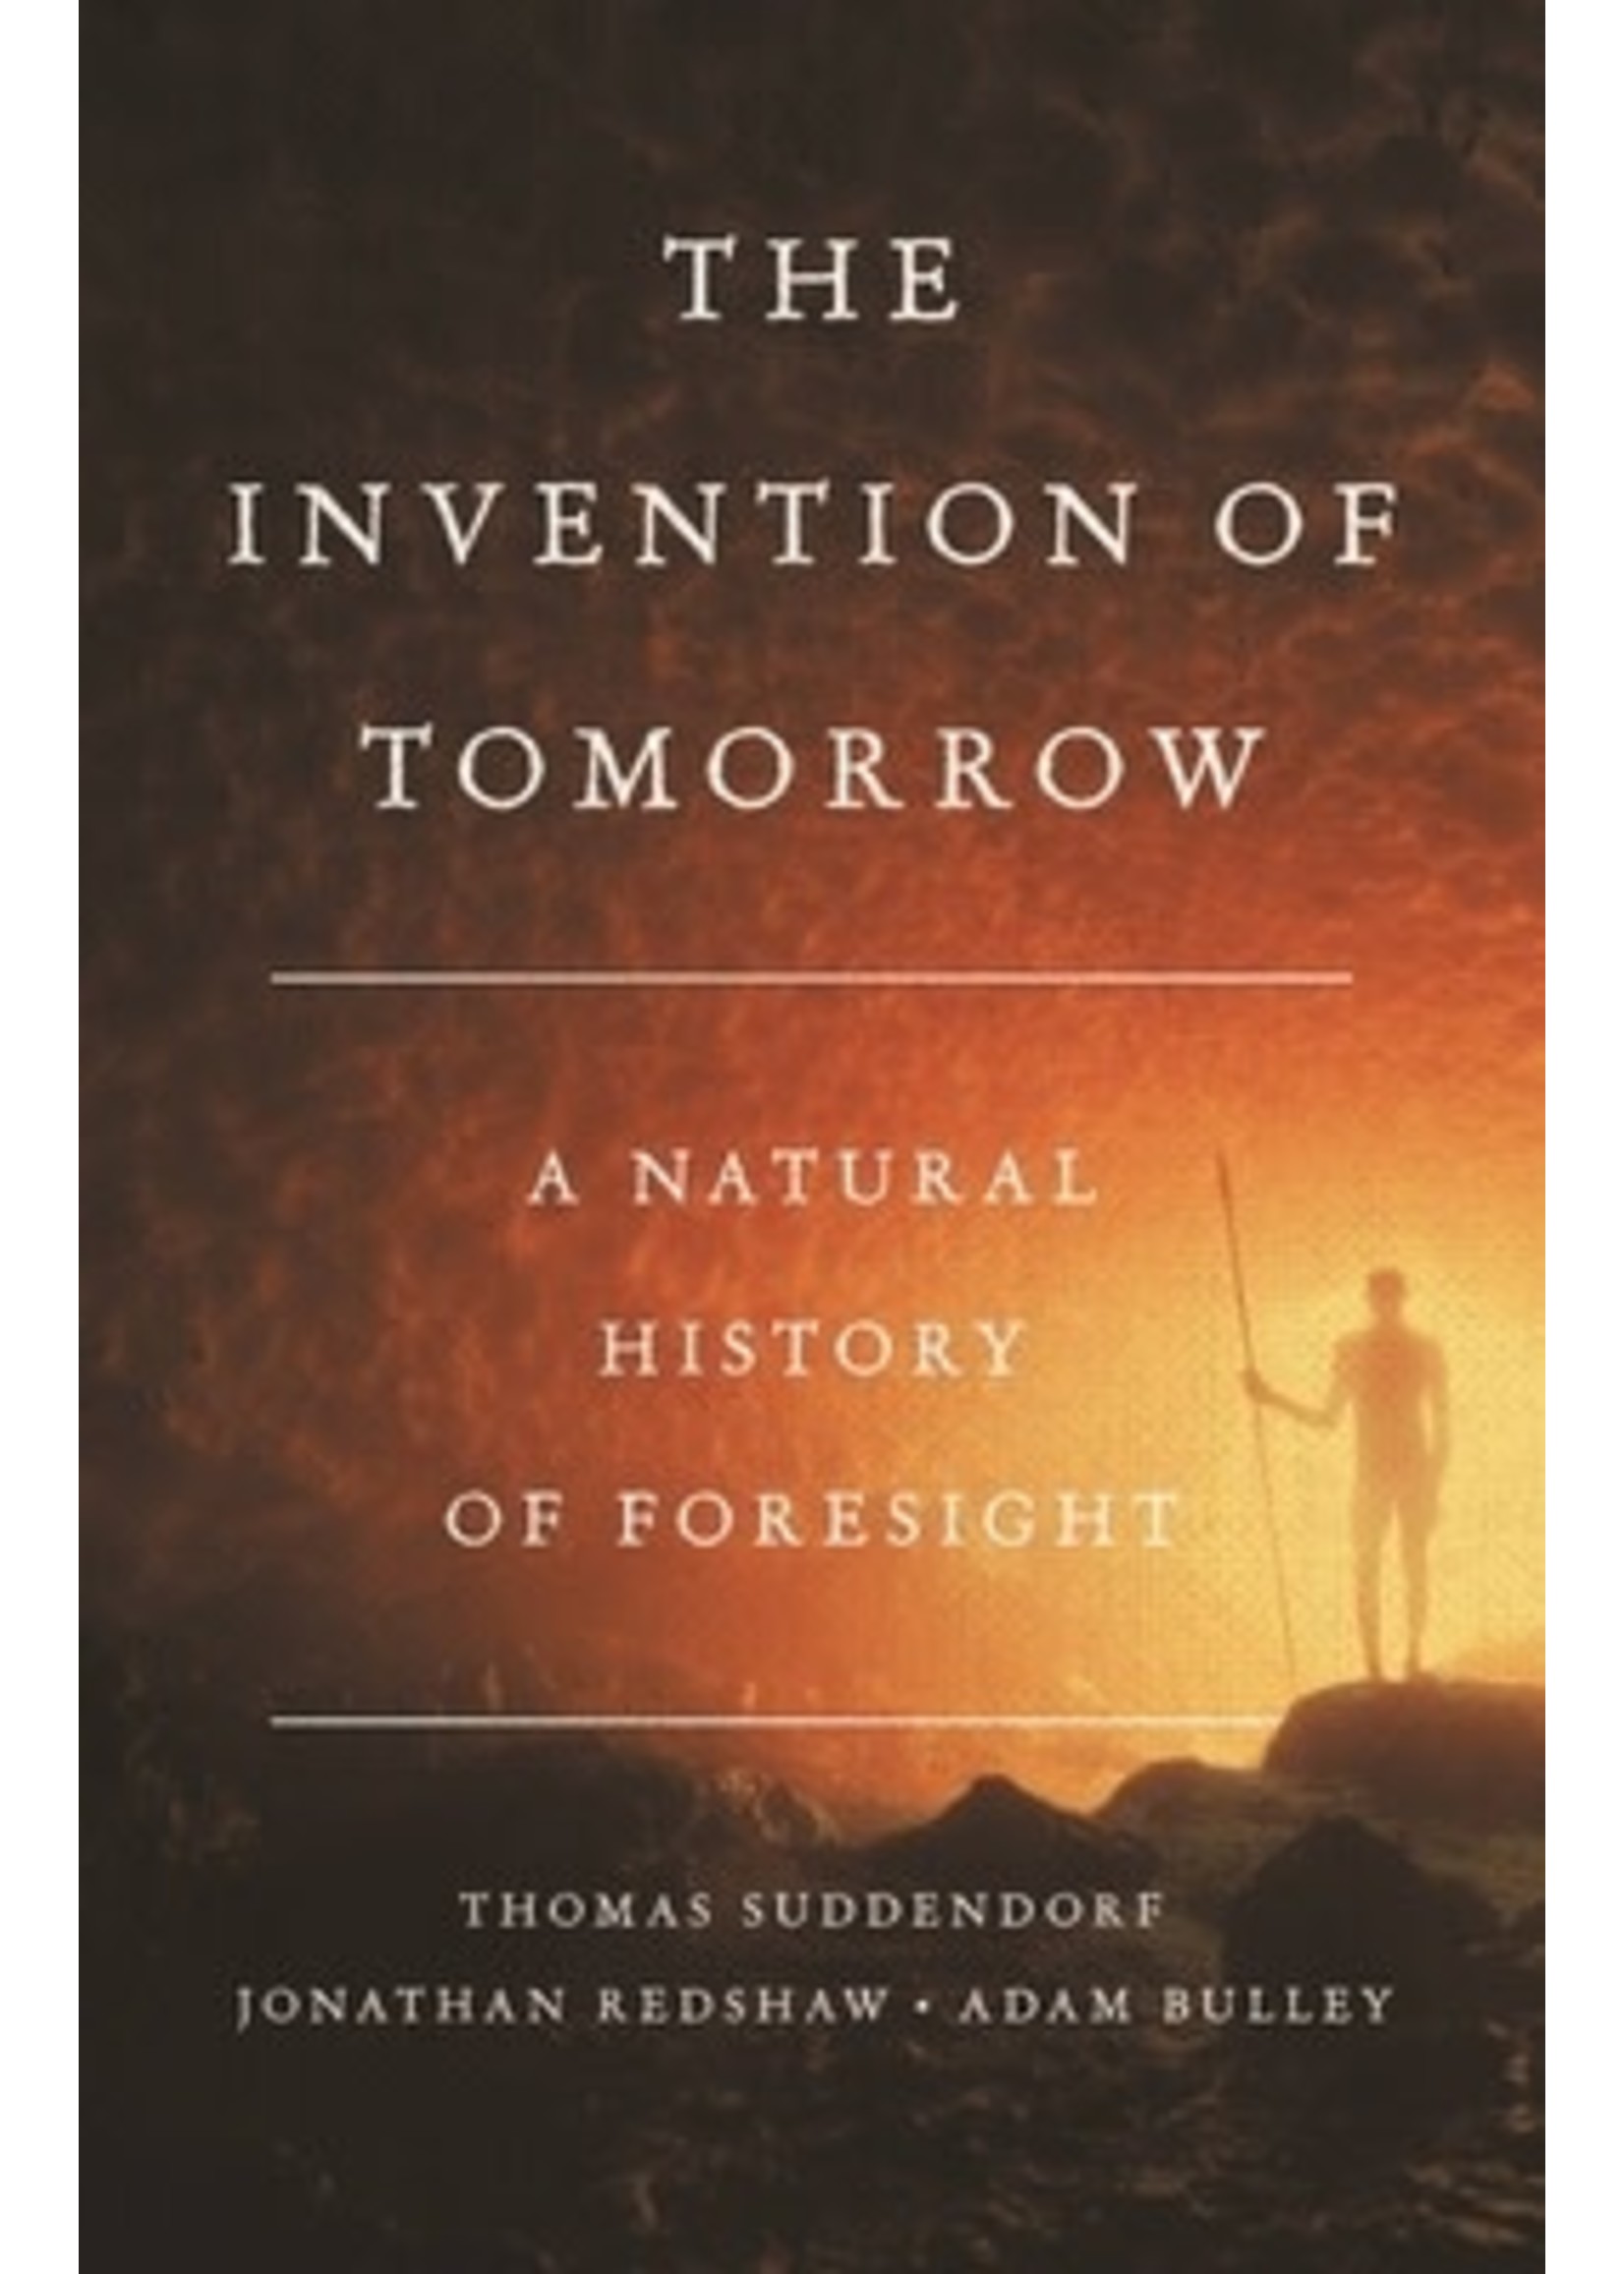 The Invention of Tomorrow: A Natural History of Foresight by Thomas Suddendorf